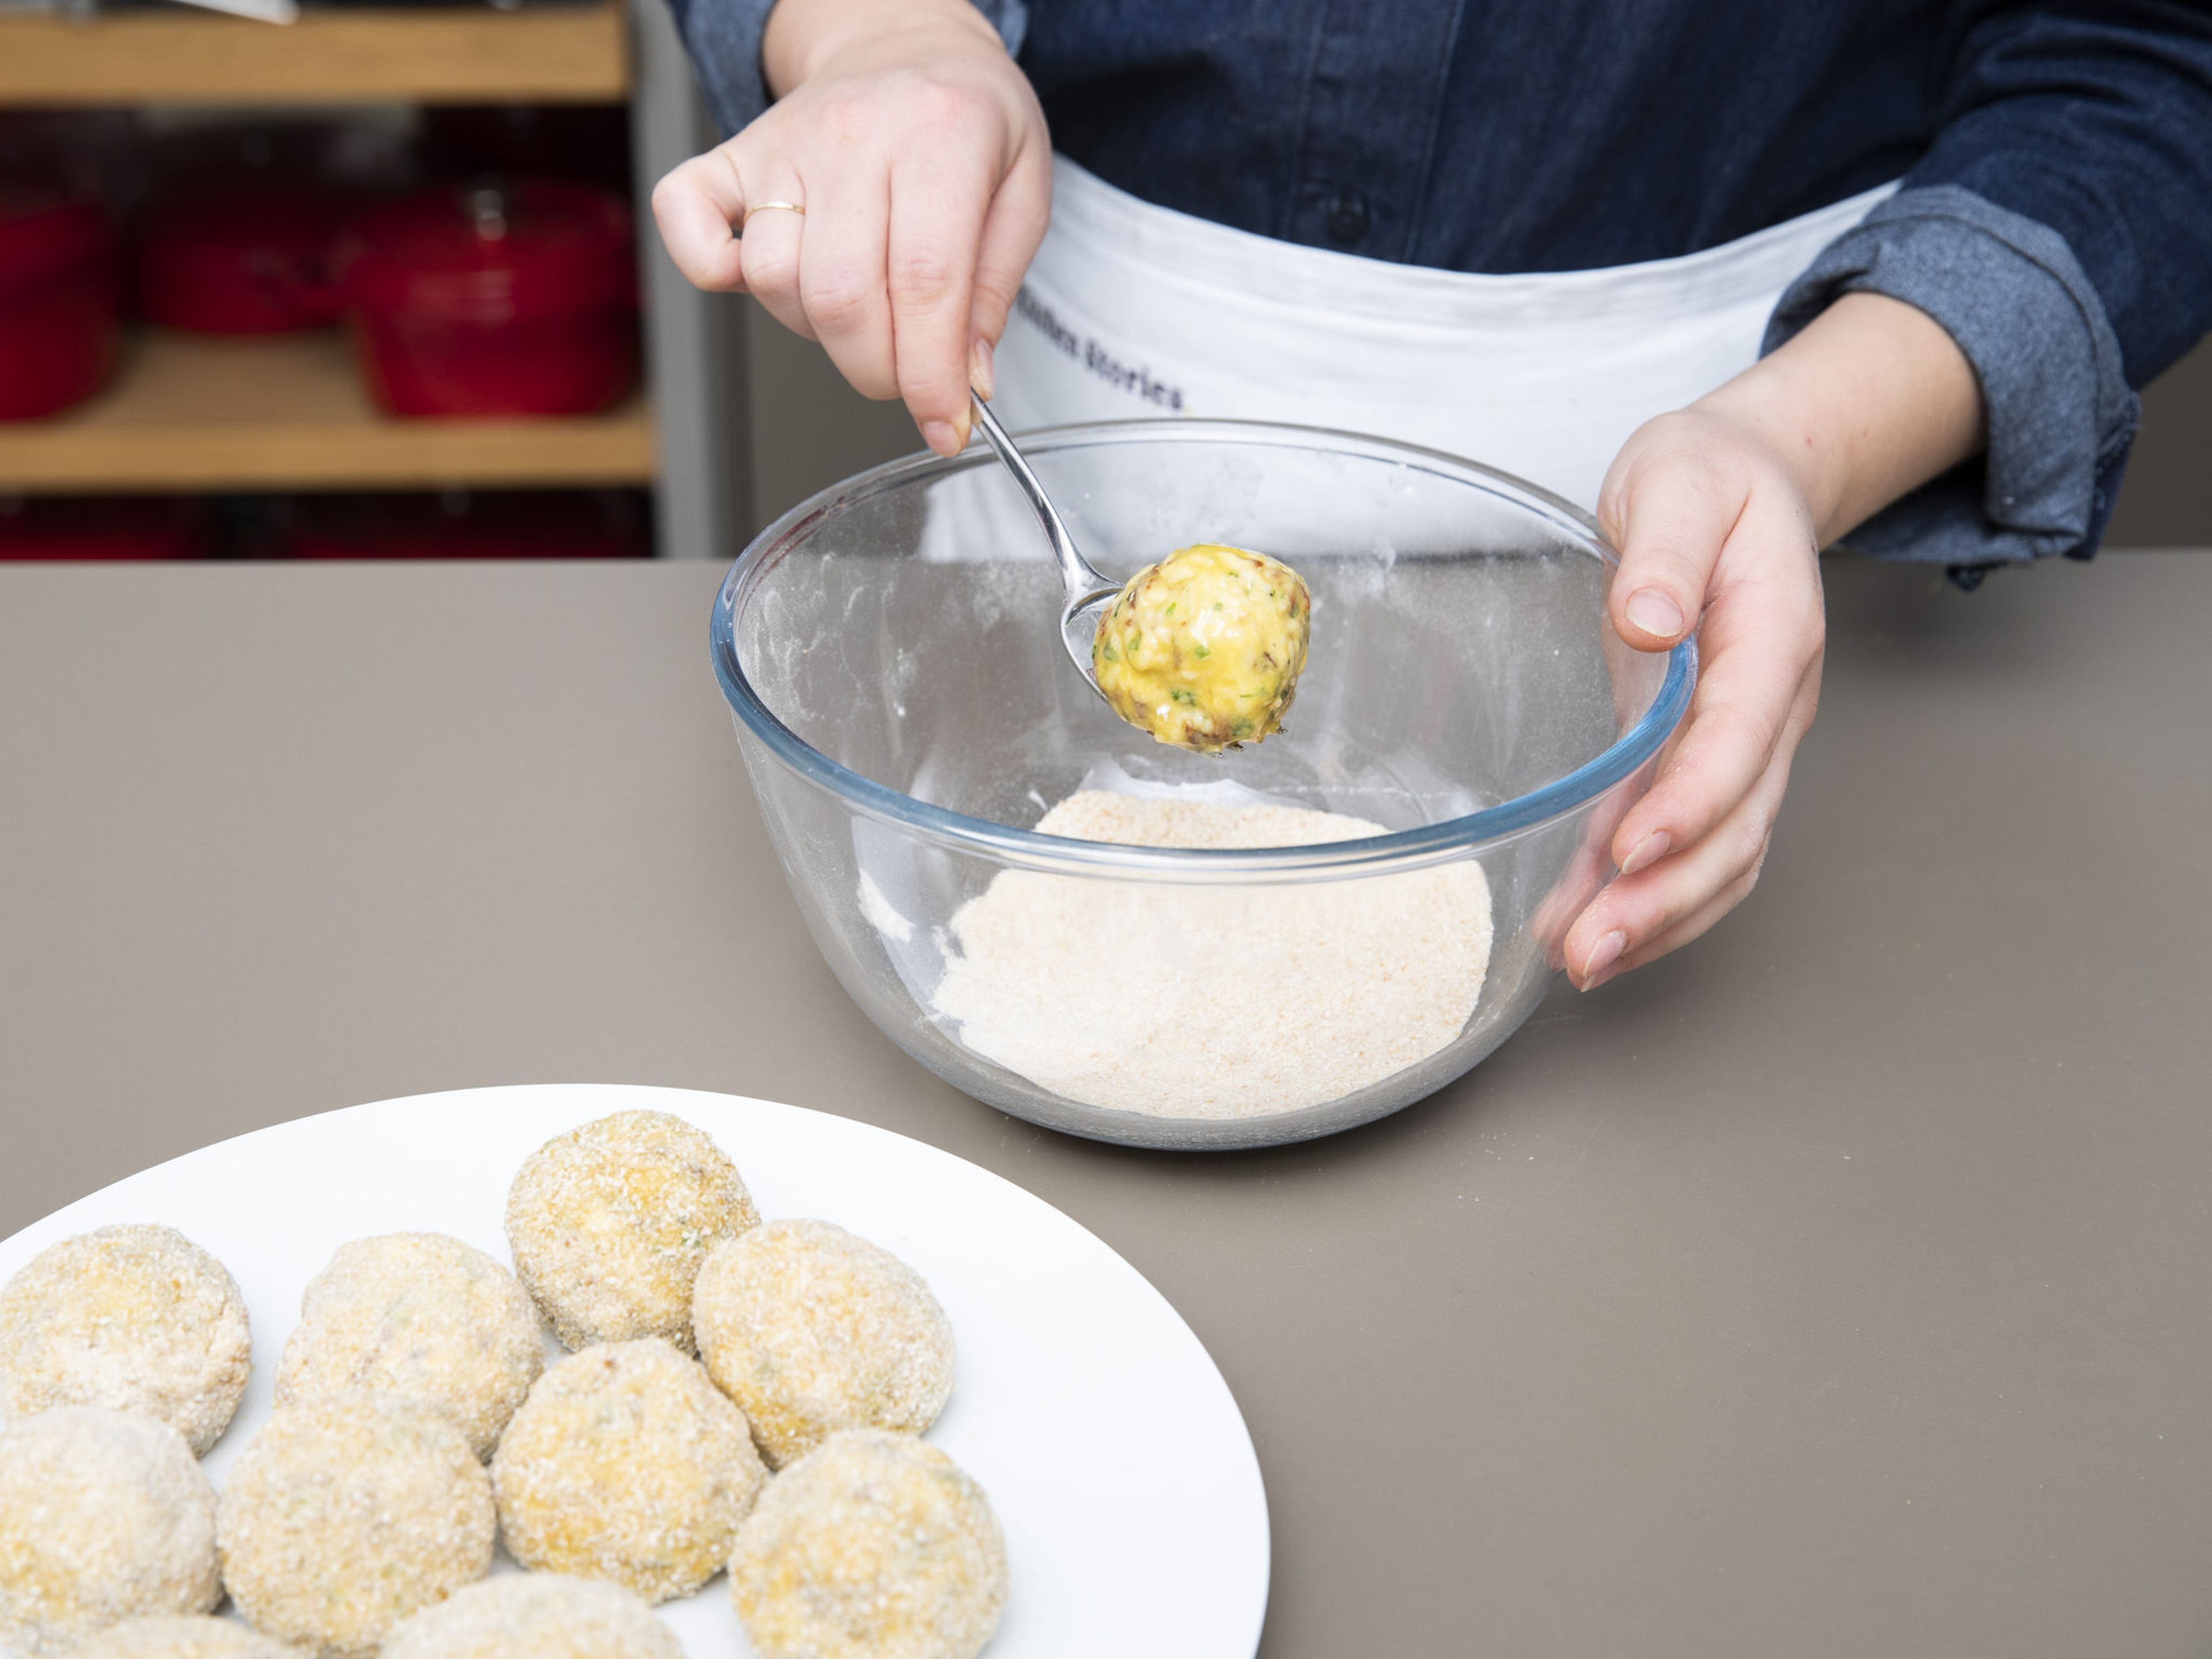 Prepare three shallow bowls for breading and add flour to the first one, breadcrumbs to the second, and lightly beat egg in the third. Dredge each arancini in flour, then dip in beaten egg, and finally coat with breadcrumbs.